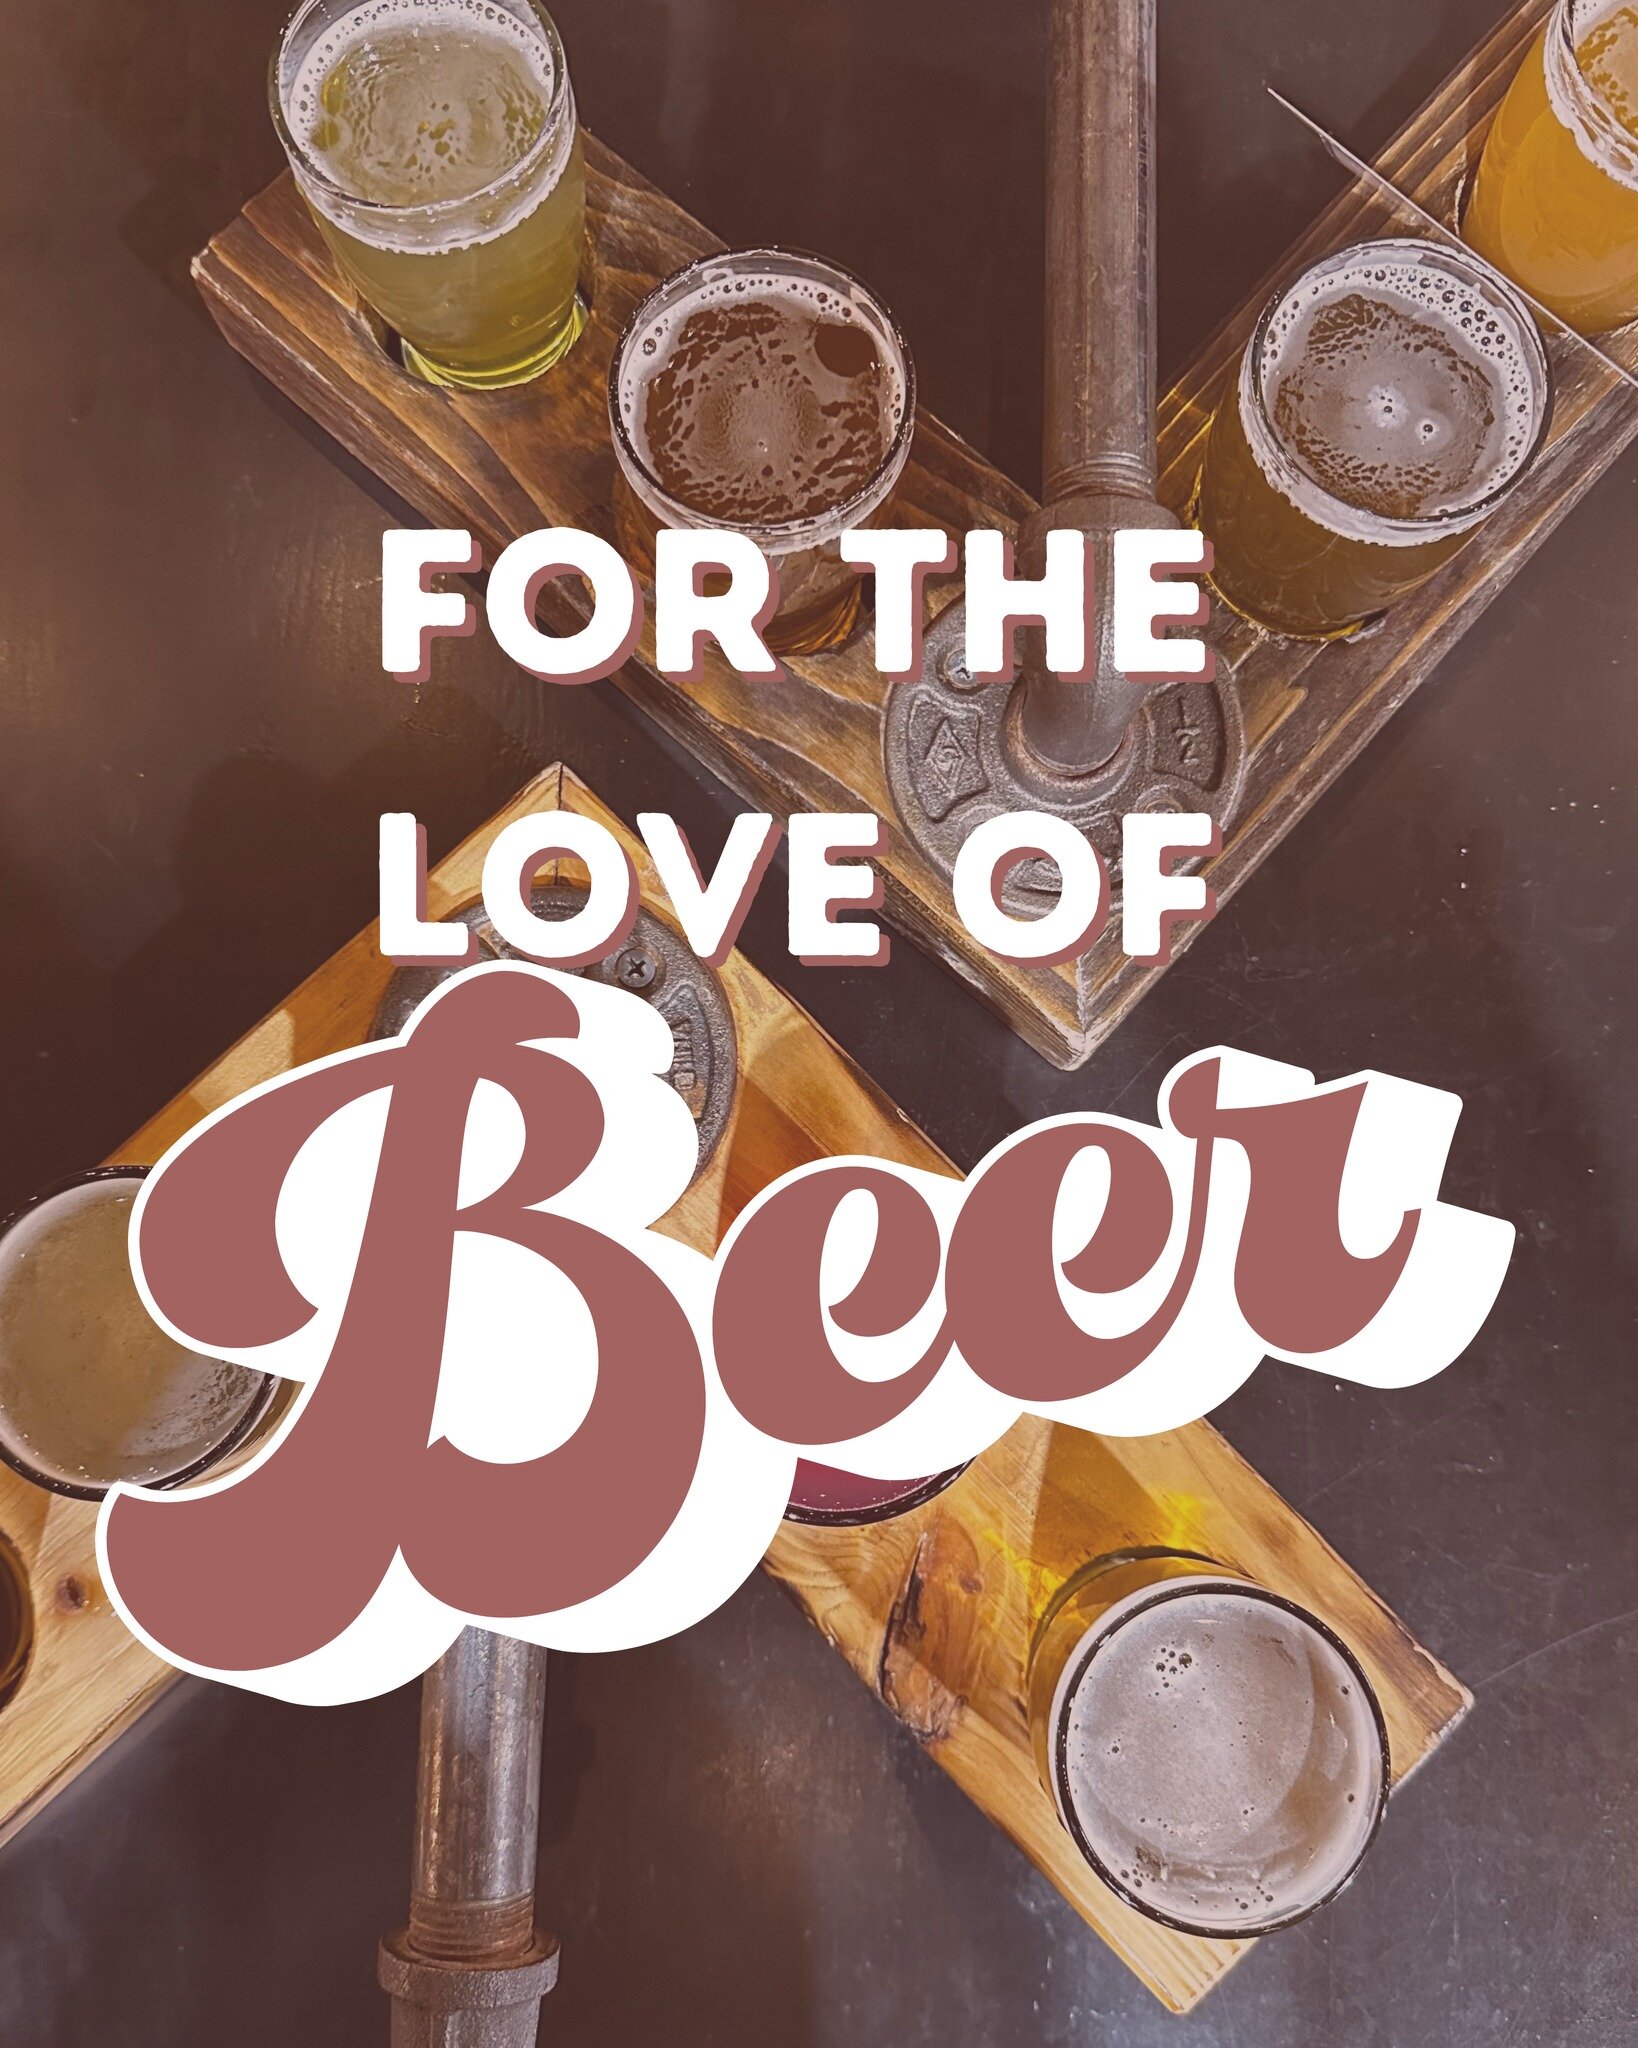 🍻💘 For the love of Beer! Our brewery tour is the perfect blend of cozy and hoppy for you and your Valentine's Day adventure. 

#FlannelAndFroth #ValentinesAdventure